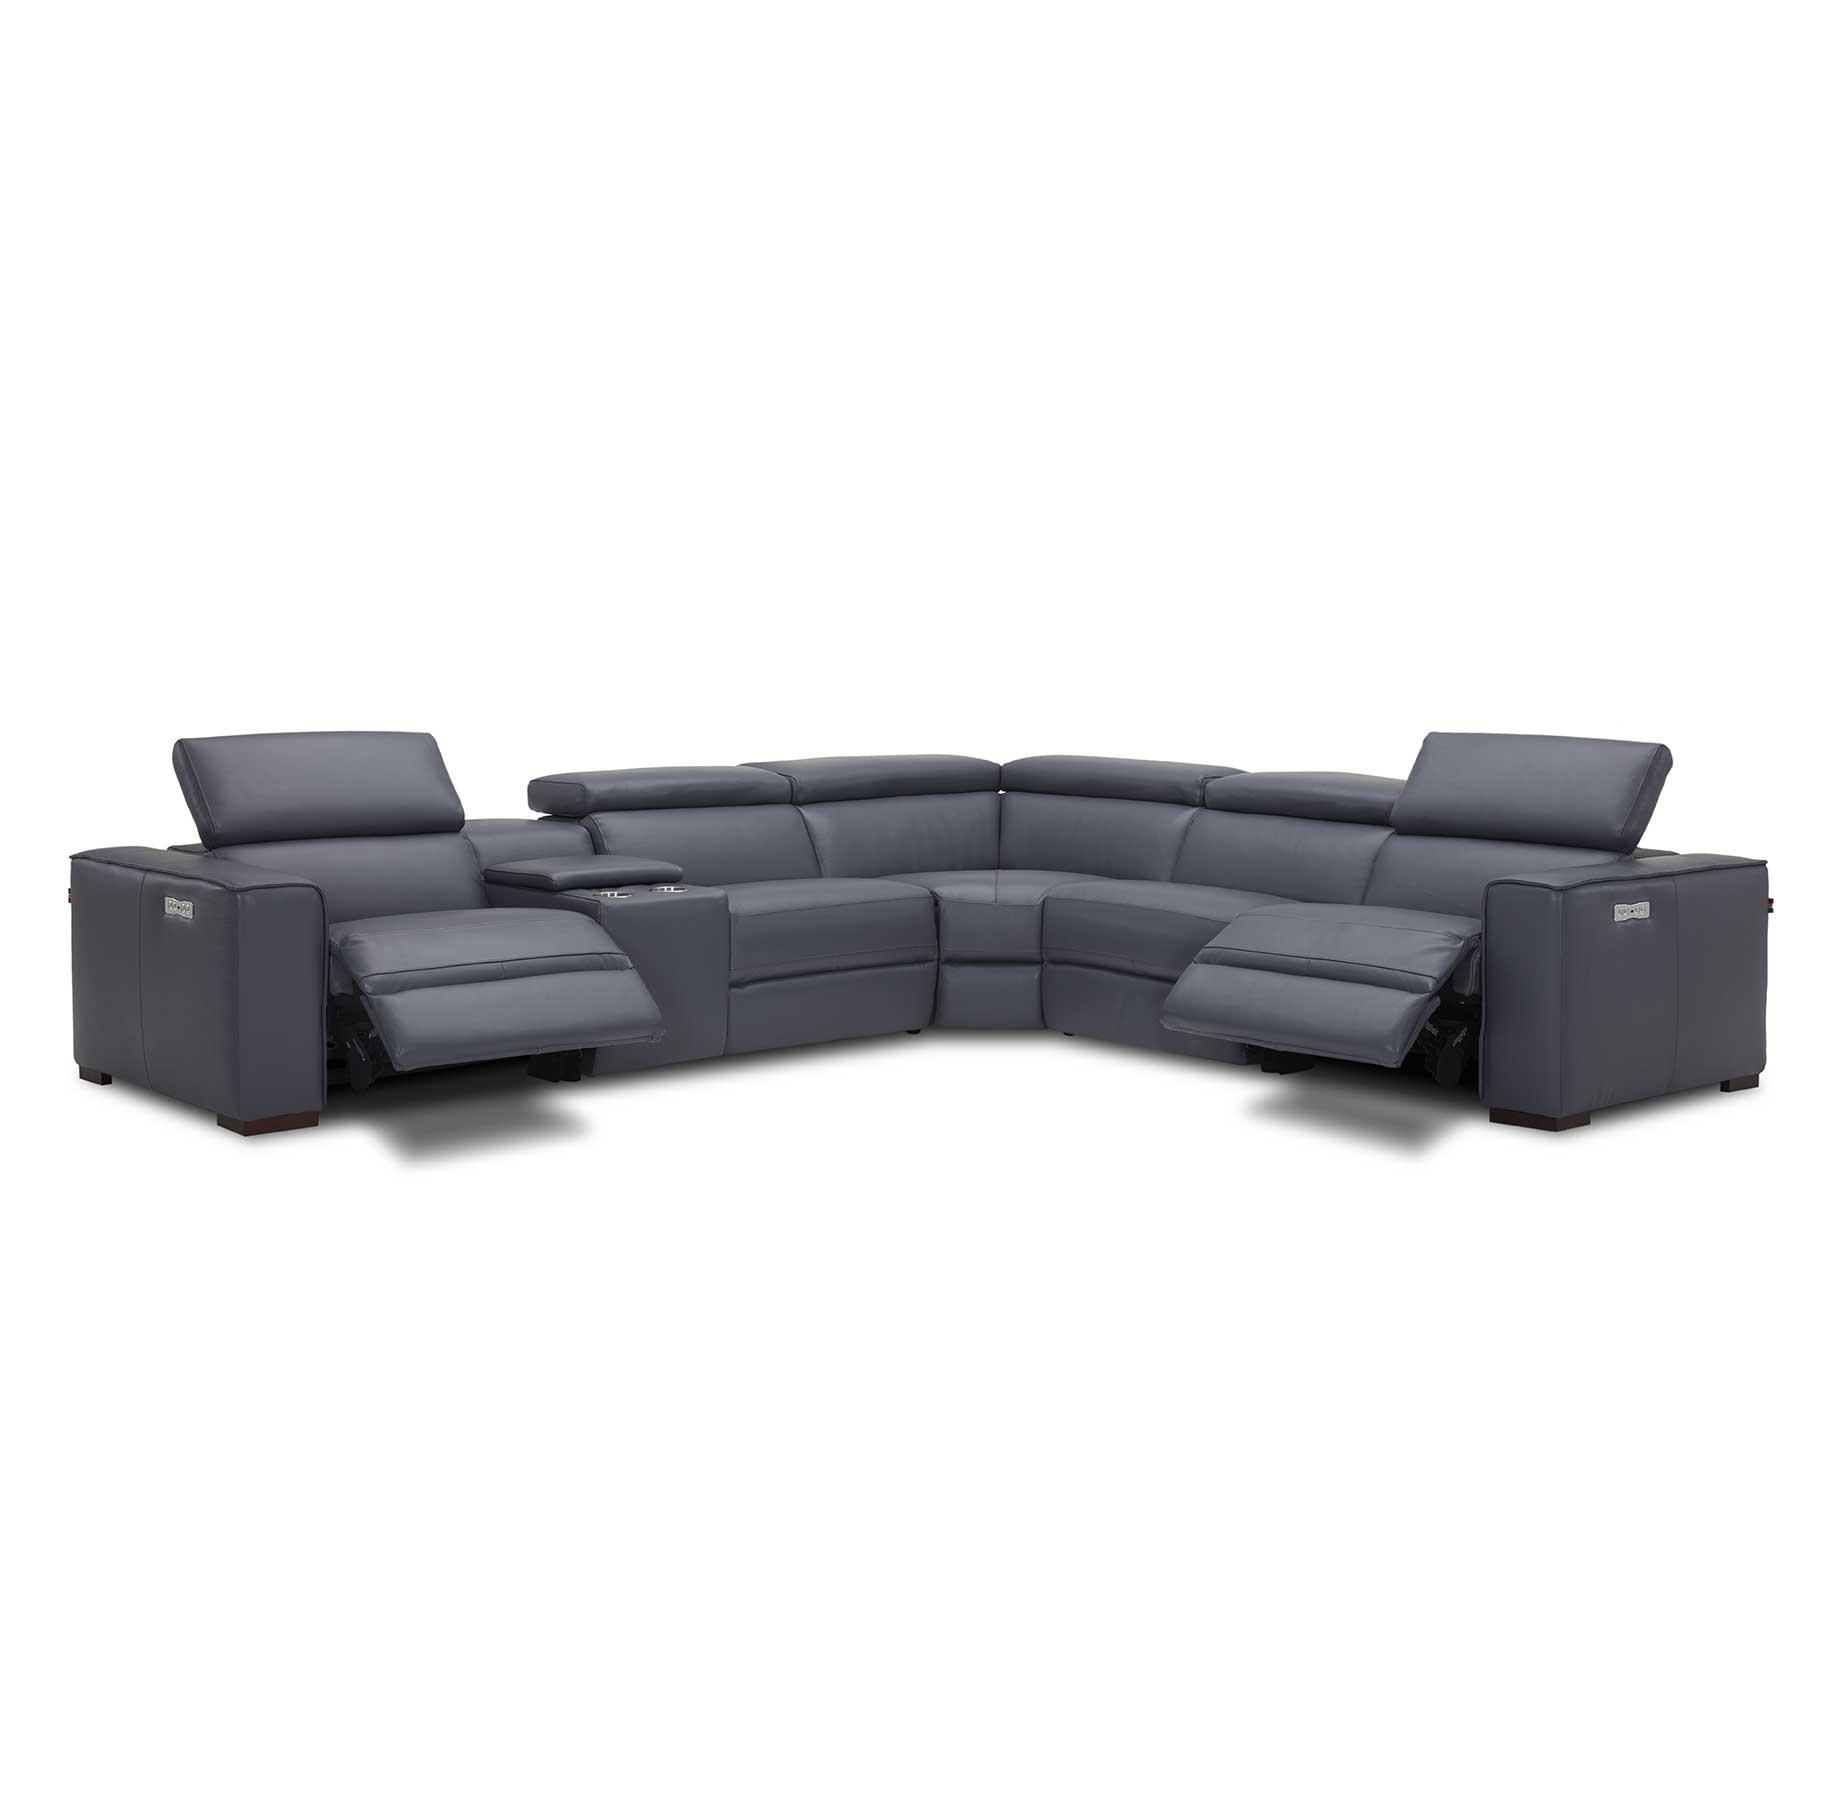 Contemporary Reclining Sectional Picasso SKU18865-BG in Blue Top grain leather